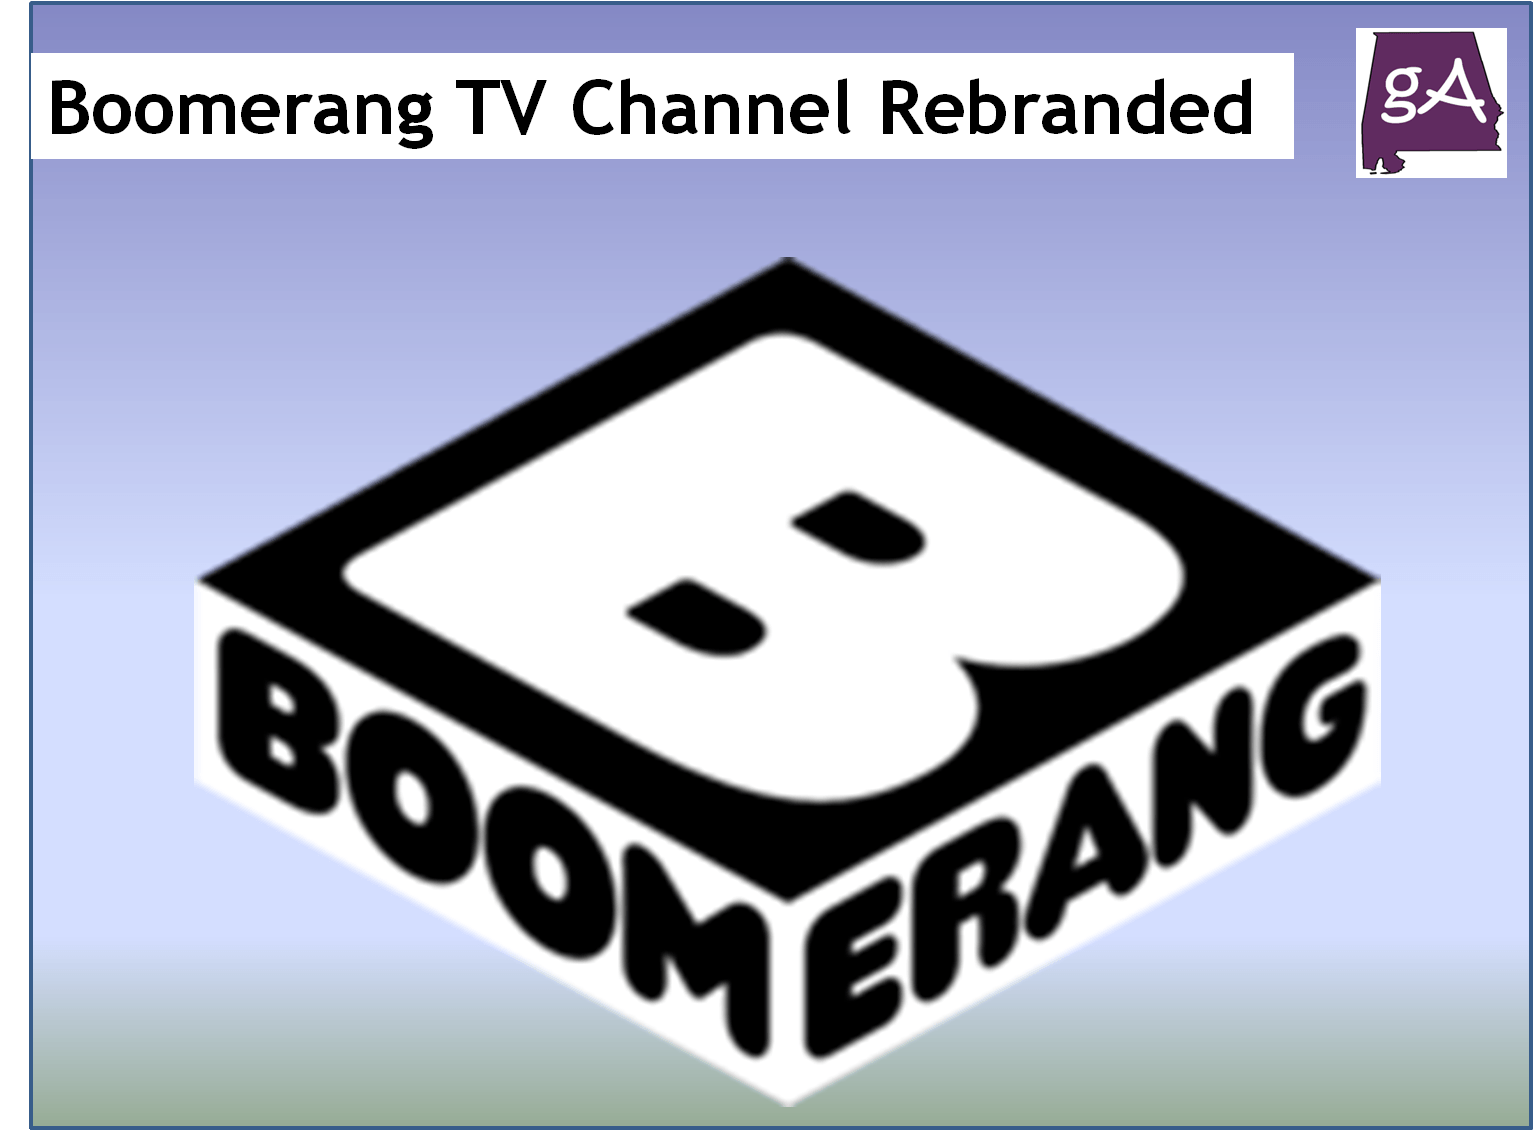 Boomerang TV Channel Logo - The Boomerang TV Channel Has Rebranded